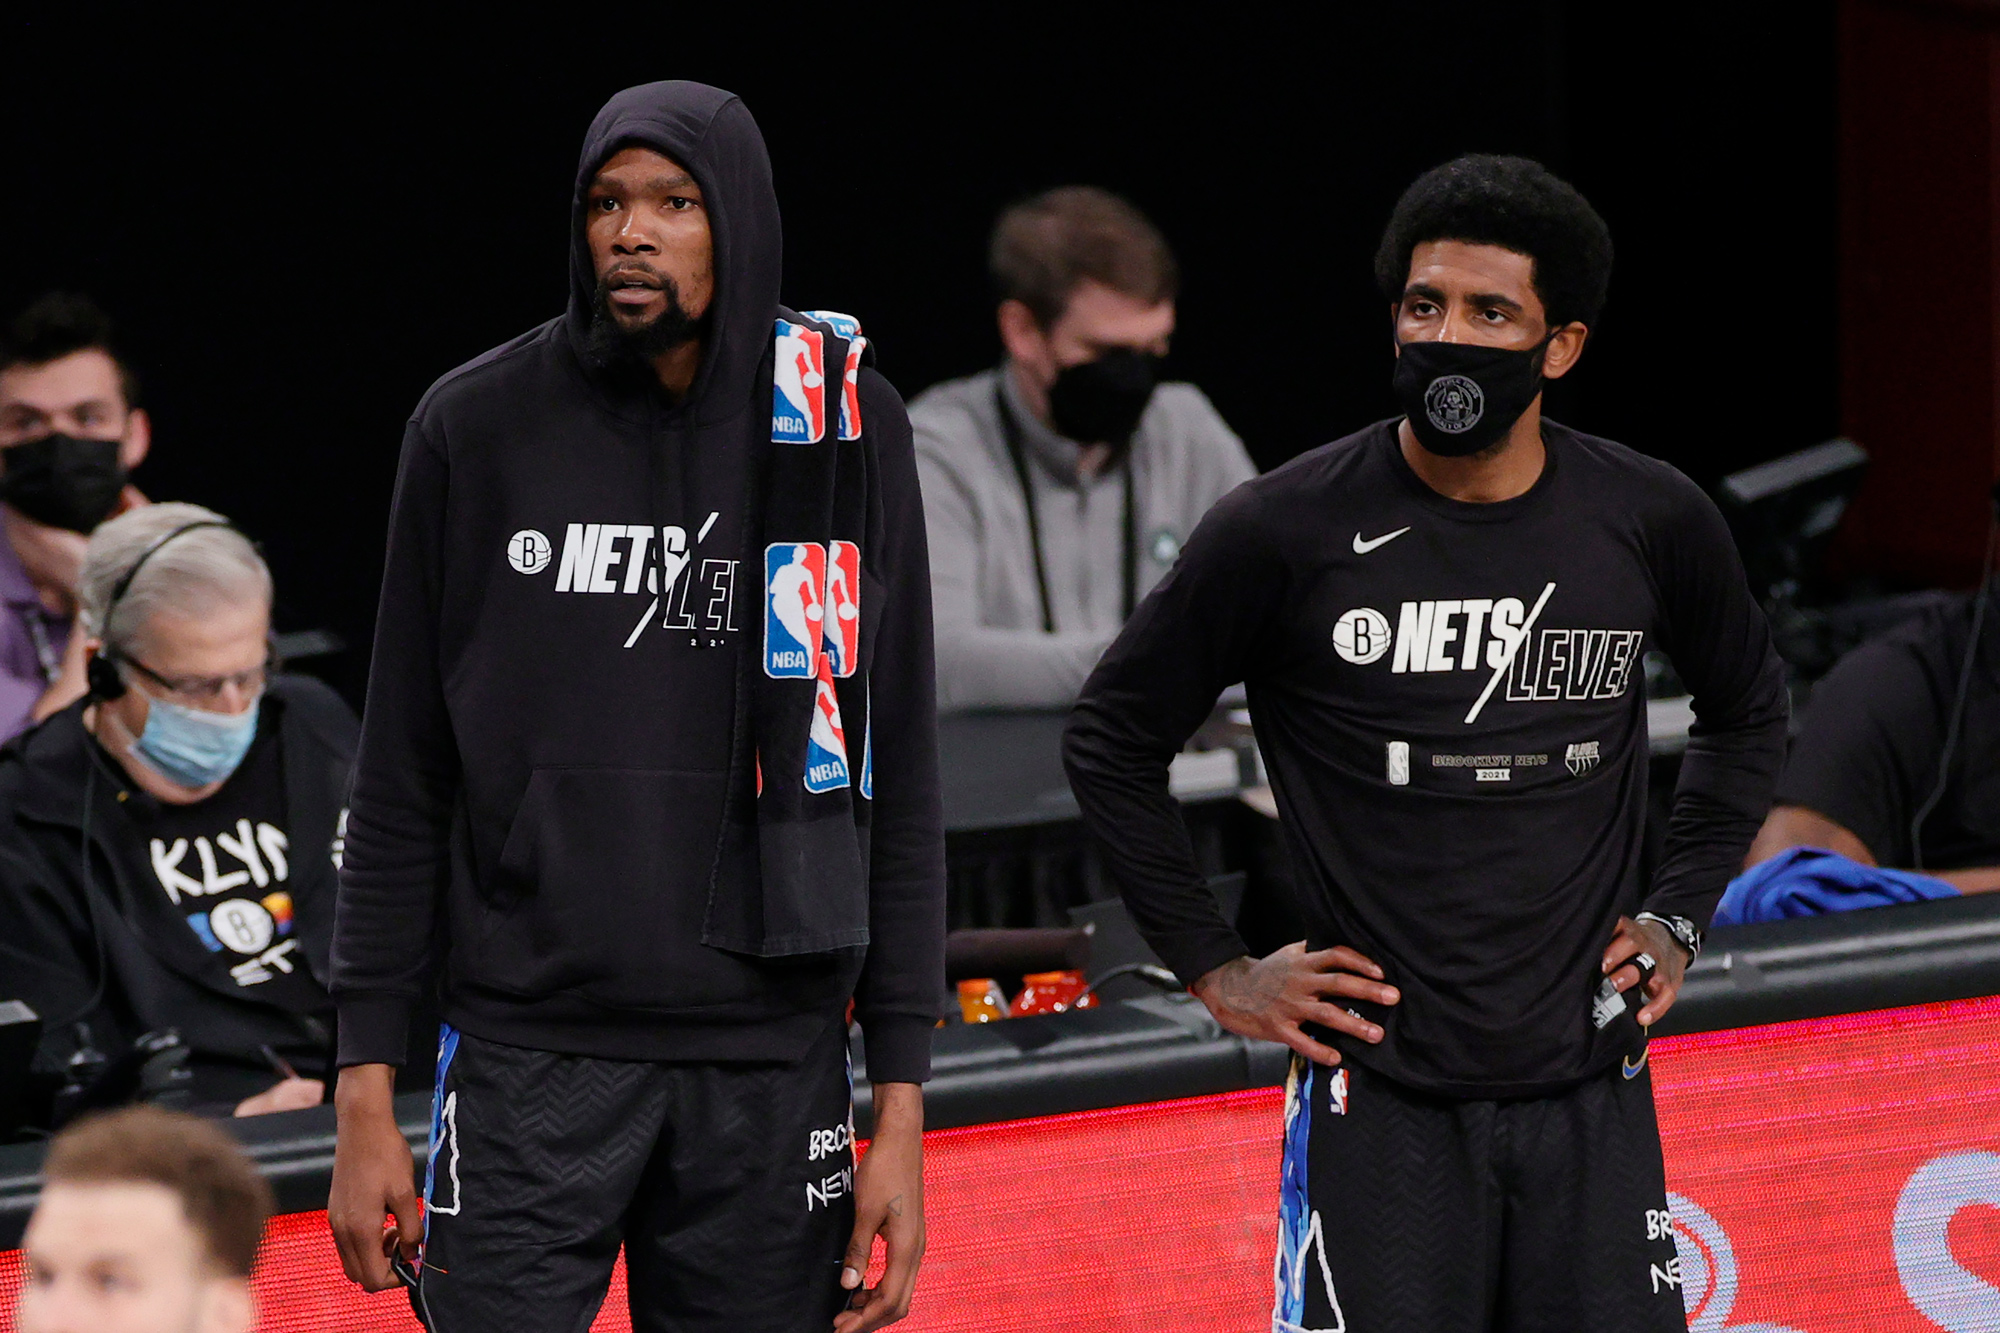 Kevin Durant, left, and Kyrie Irving of the Brooklyn Nets watch during the game at Barclays Center on June 1, in the Brooklyn borough of New York City.